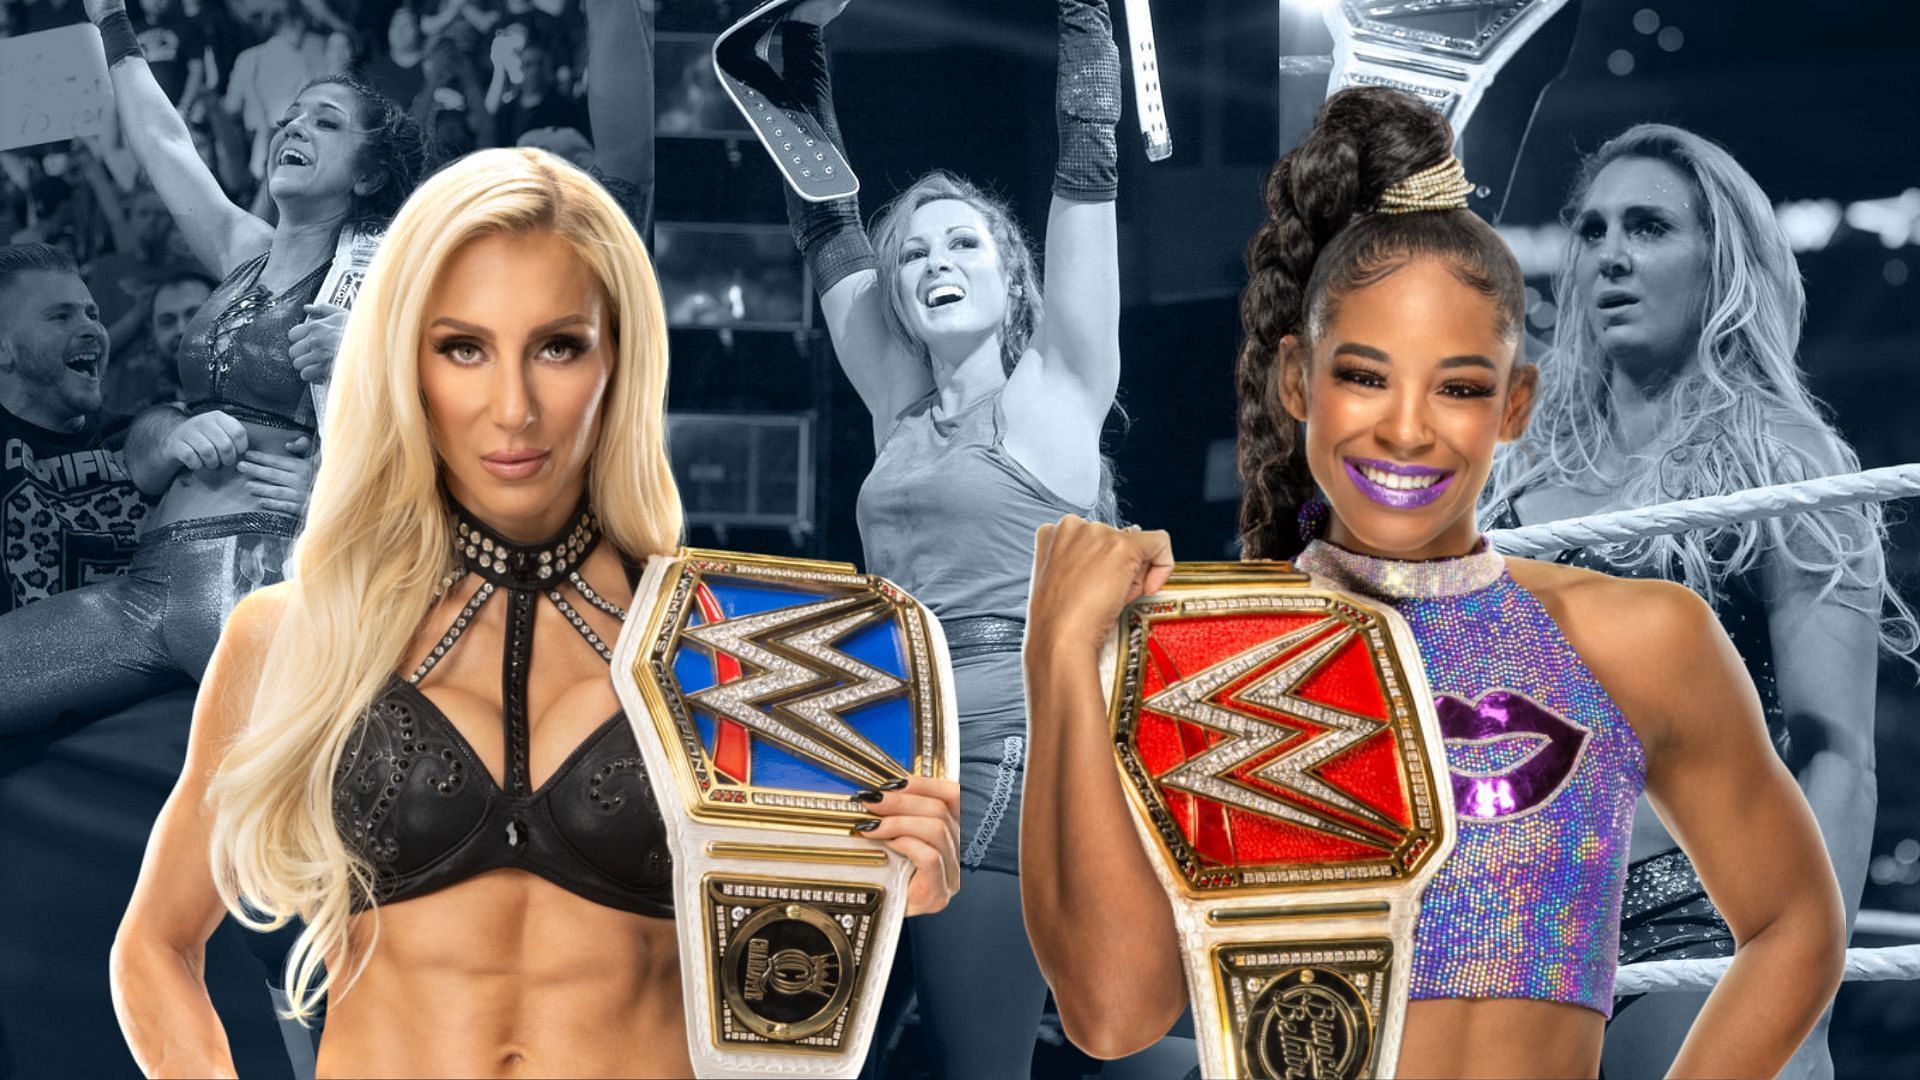 Charlotte Flair is on her 14th world title run, while Bianca Belair has been champion for a record 323 days and counting